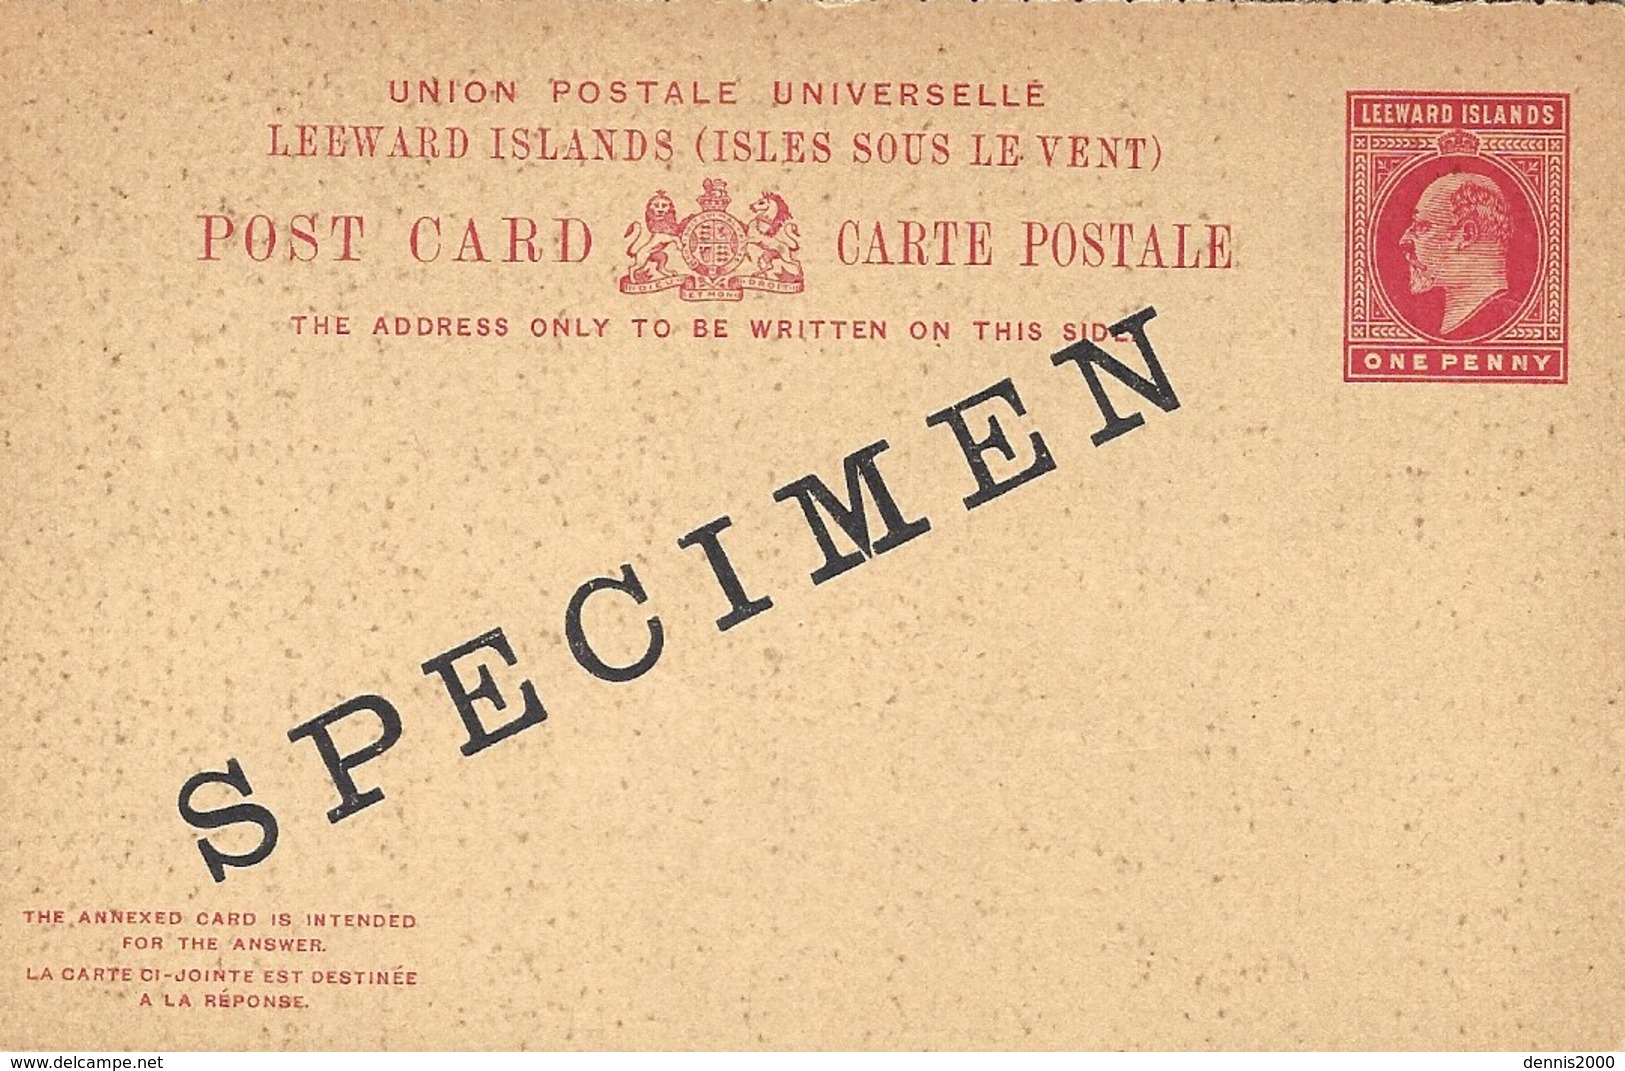 POST CARD  E P One Penny   + SPECIMEN  -  With Reply - Leeward  Islands